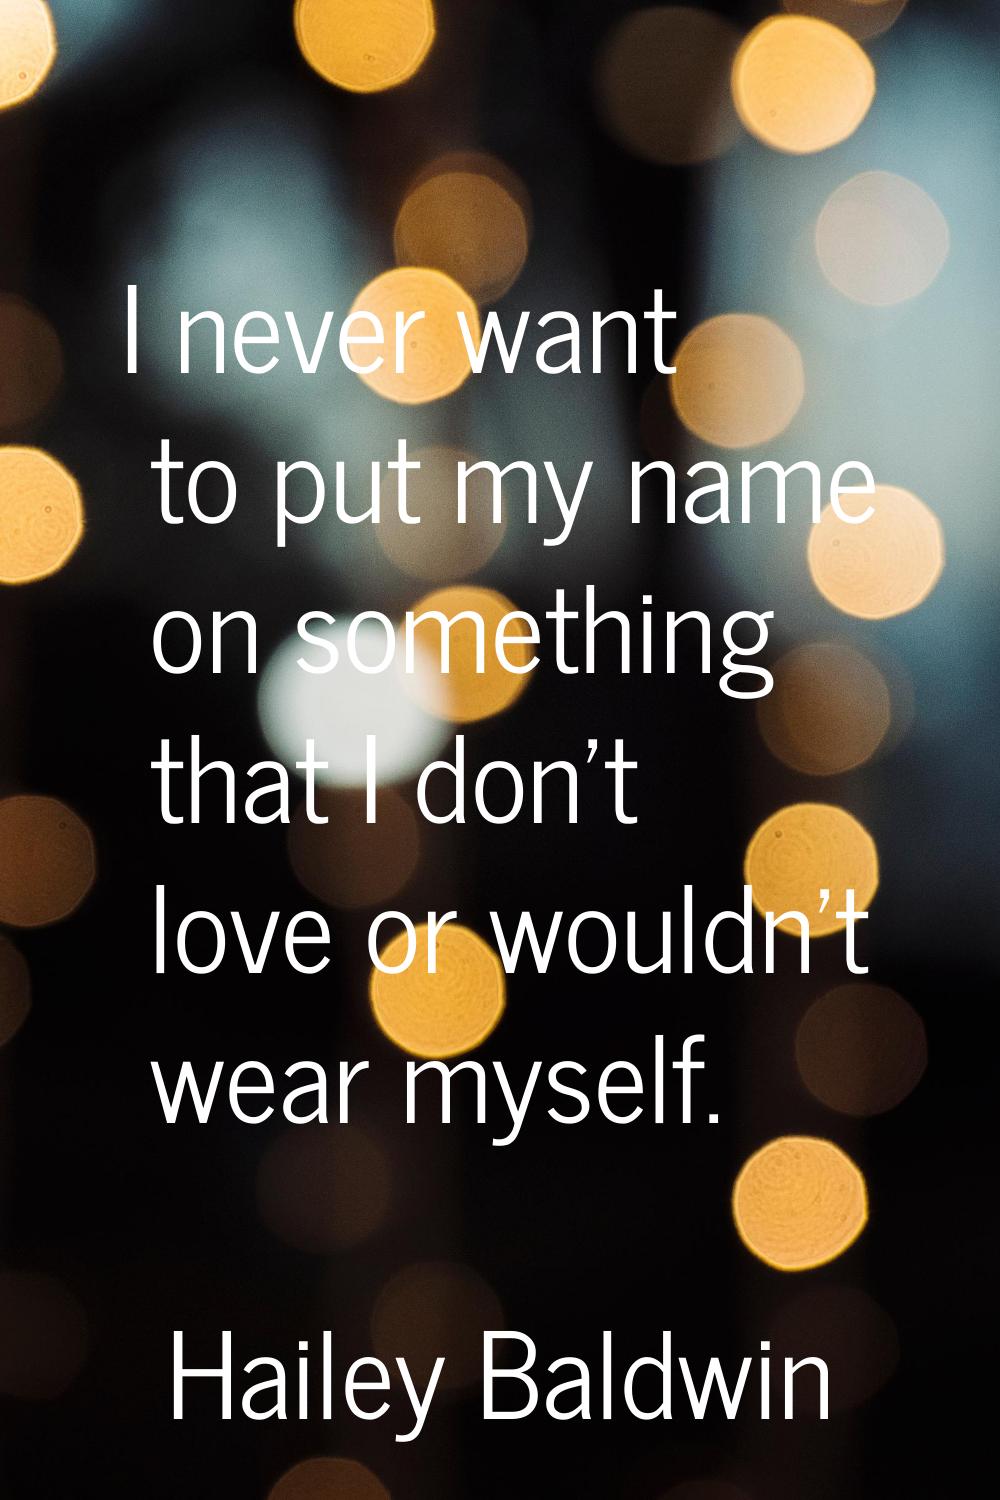 I never want to put my name on something that I don't love or wouldn't wear myself.